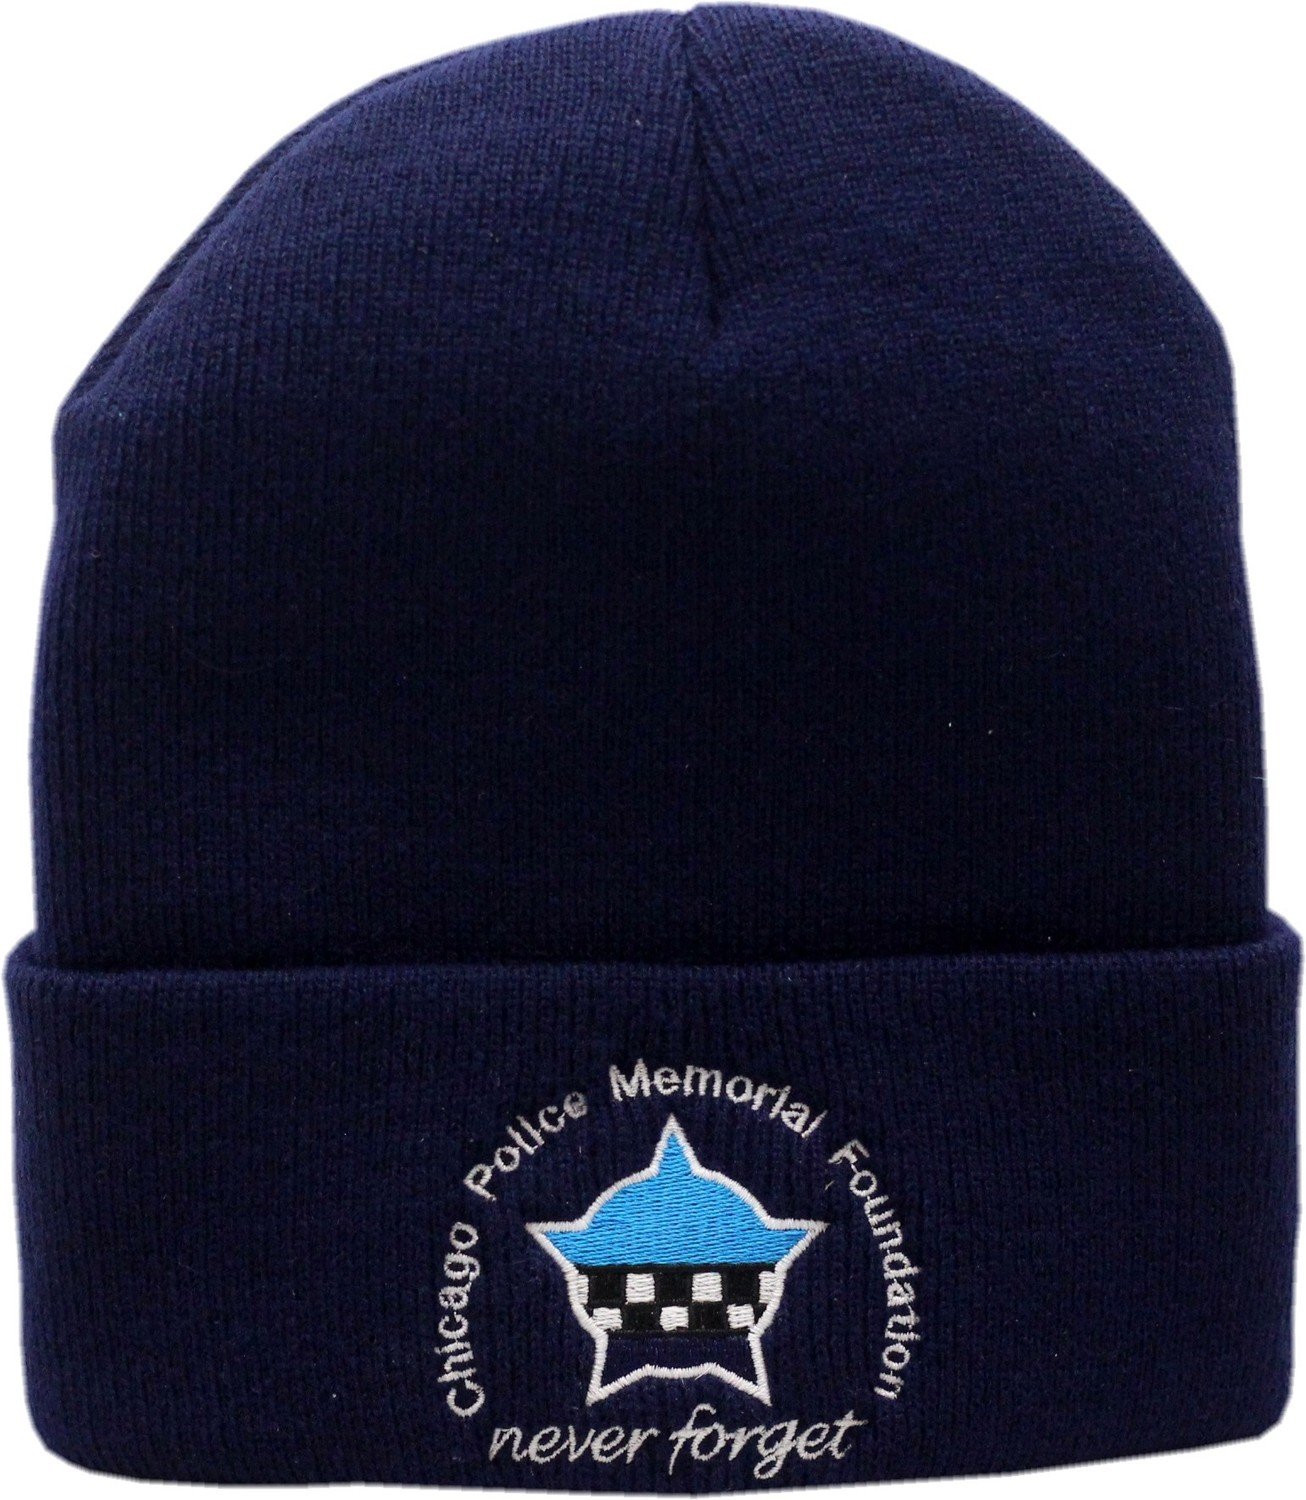 CPD Memorial Foundation Cuffed Knit Hat Navy